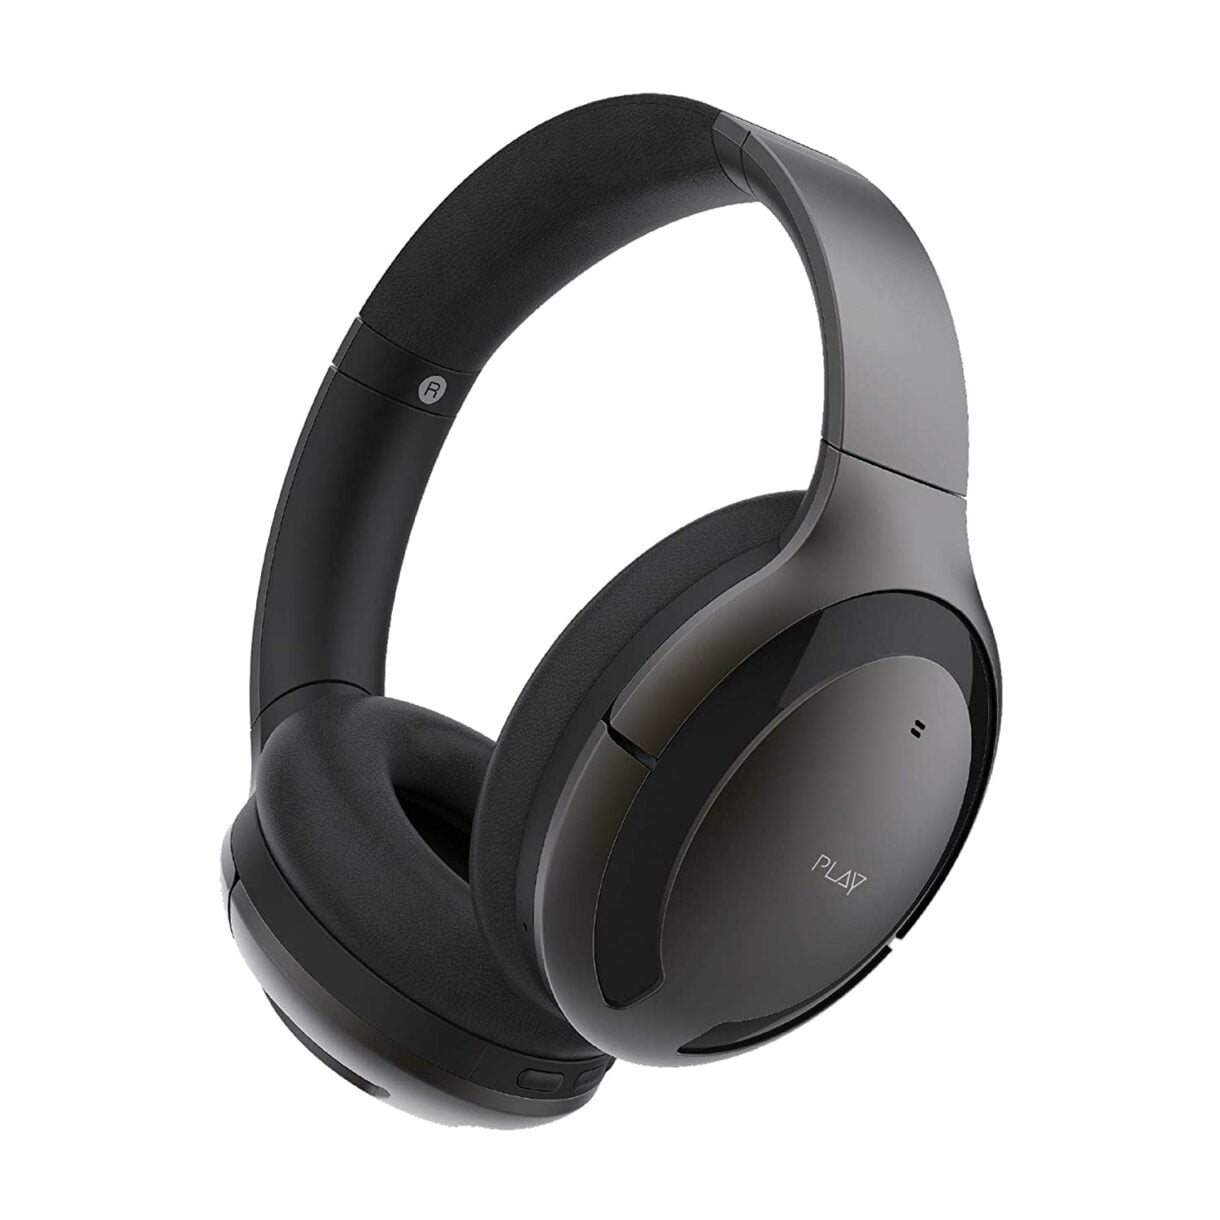 PlayGo BH70 Hybrid Active Noise Cancelling Headphones